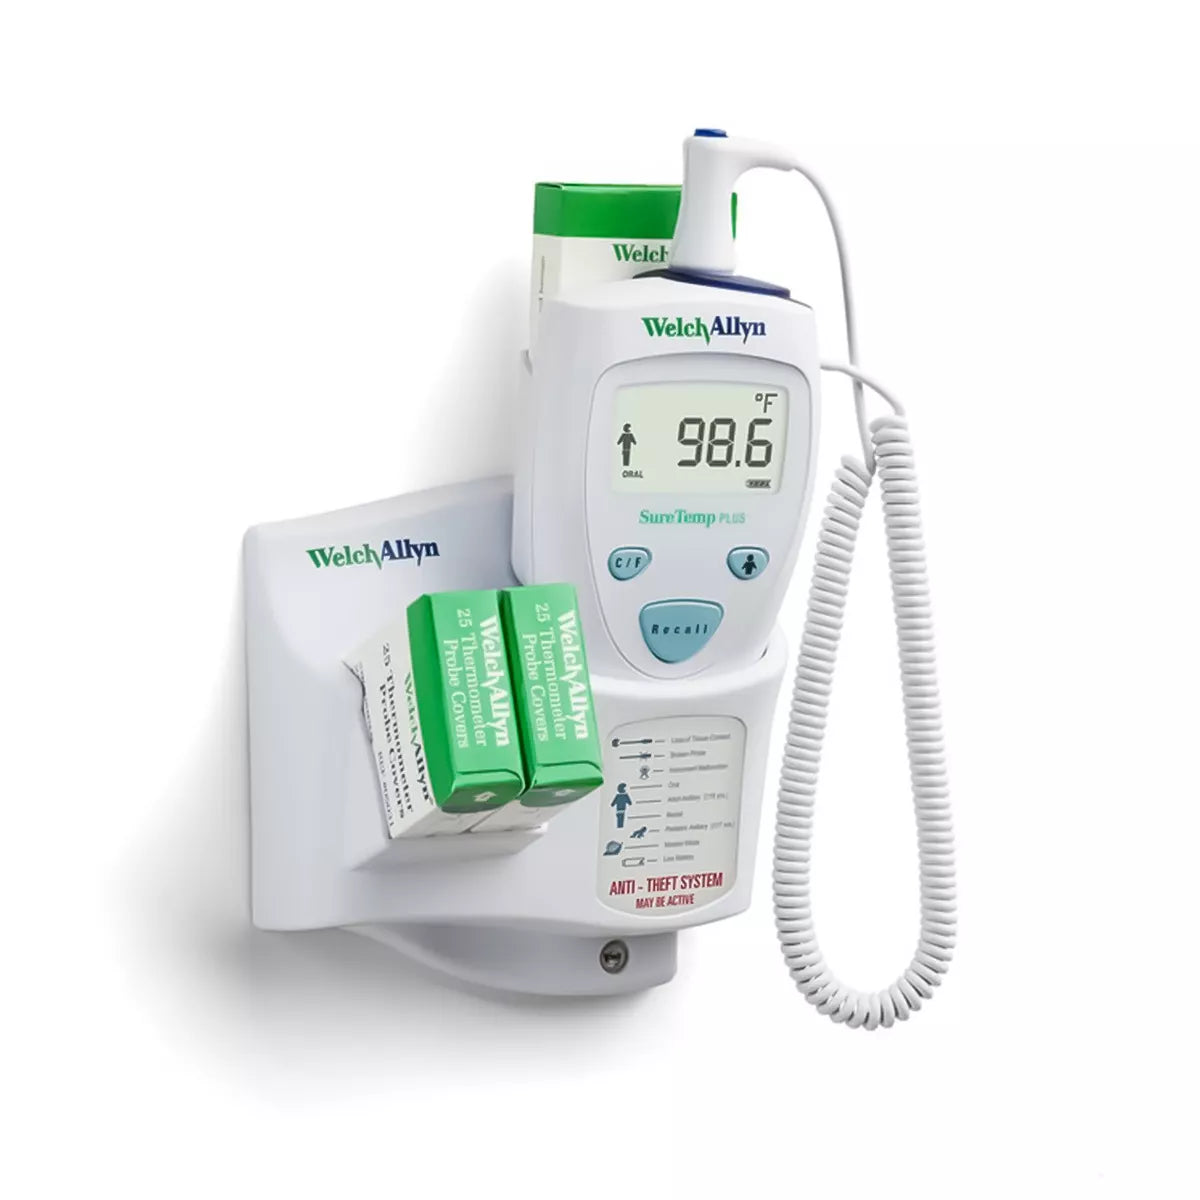 Welch Allyn SureTemp Plus 690 Wall-Mount Electronic Thermometer (One per Room) with Interchangeable Oral Probe Well Welch Allyn